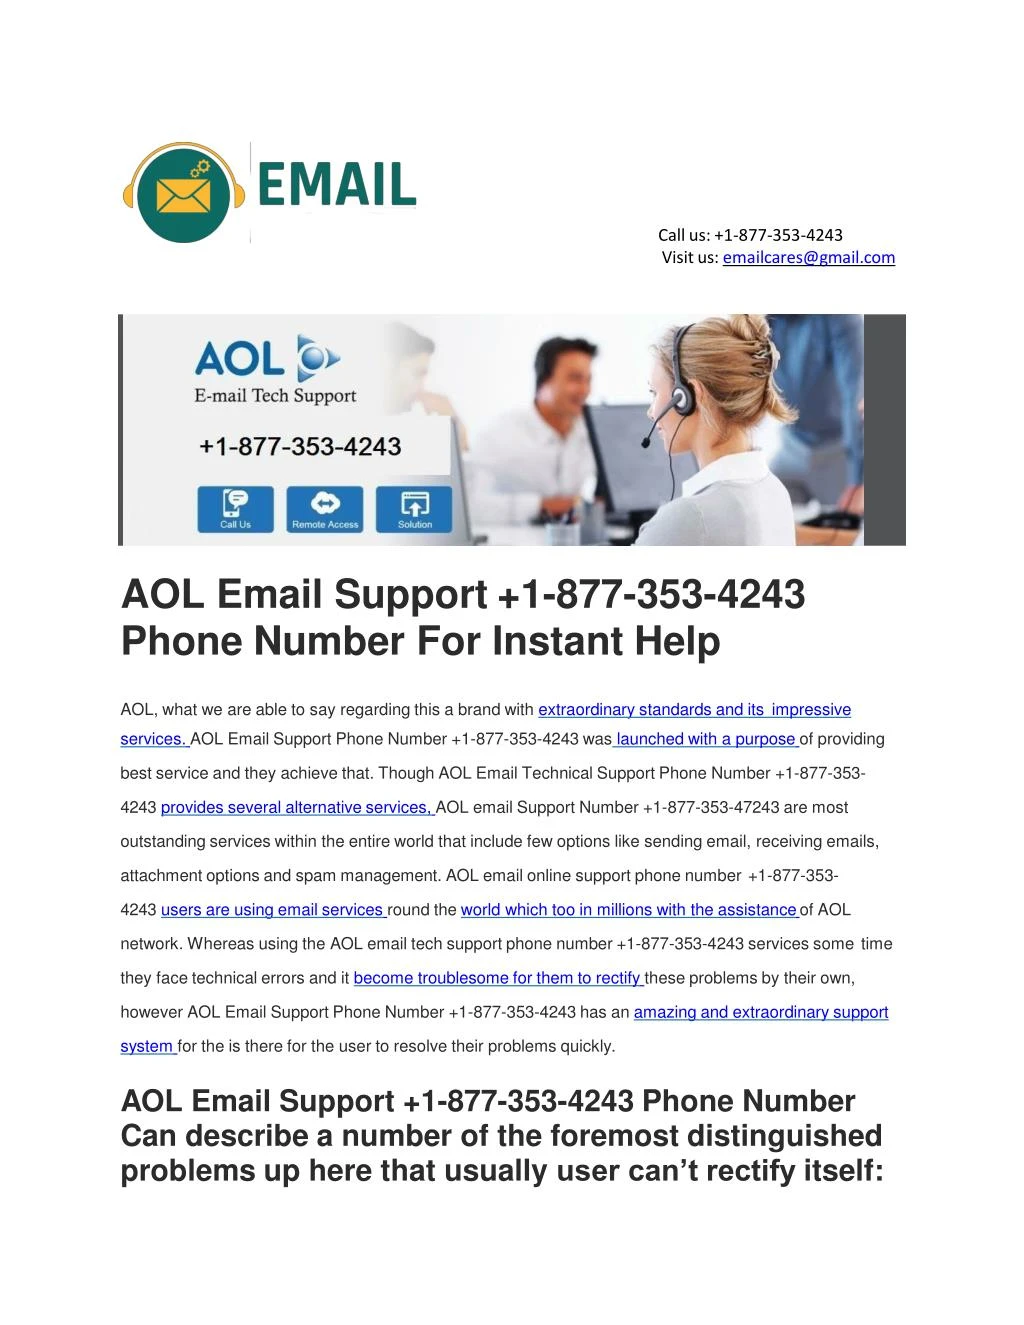 aol email support 1 877 353 4243 phone number for instant help